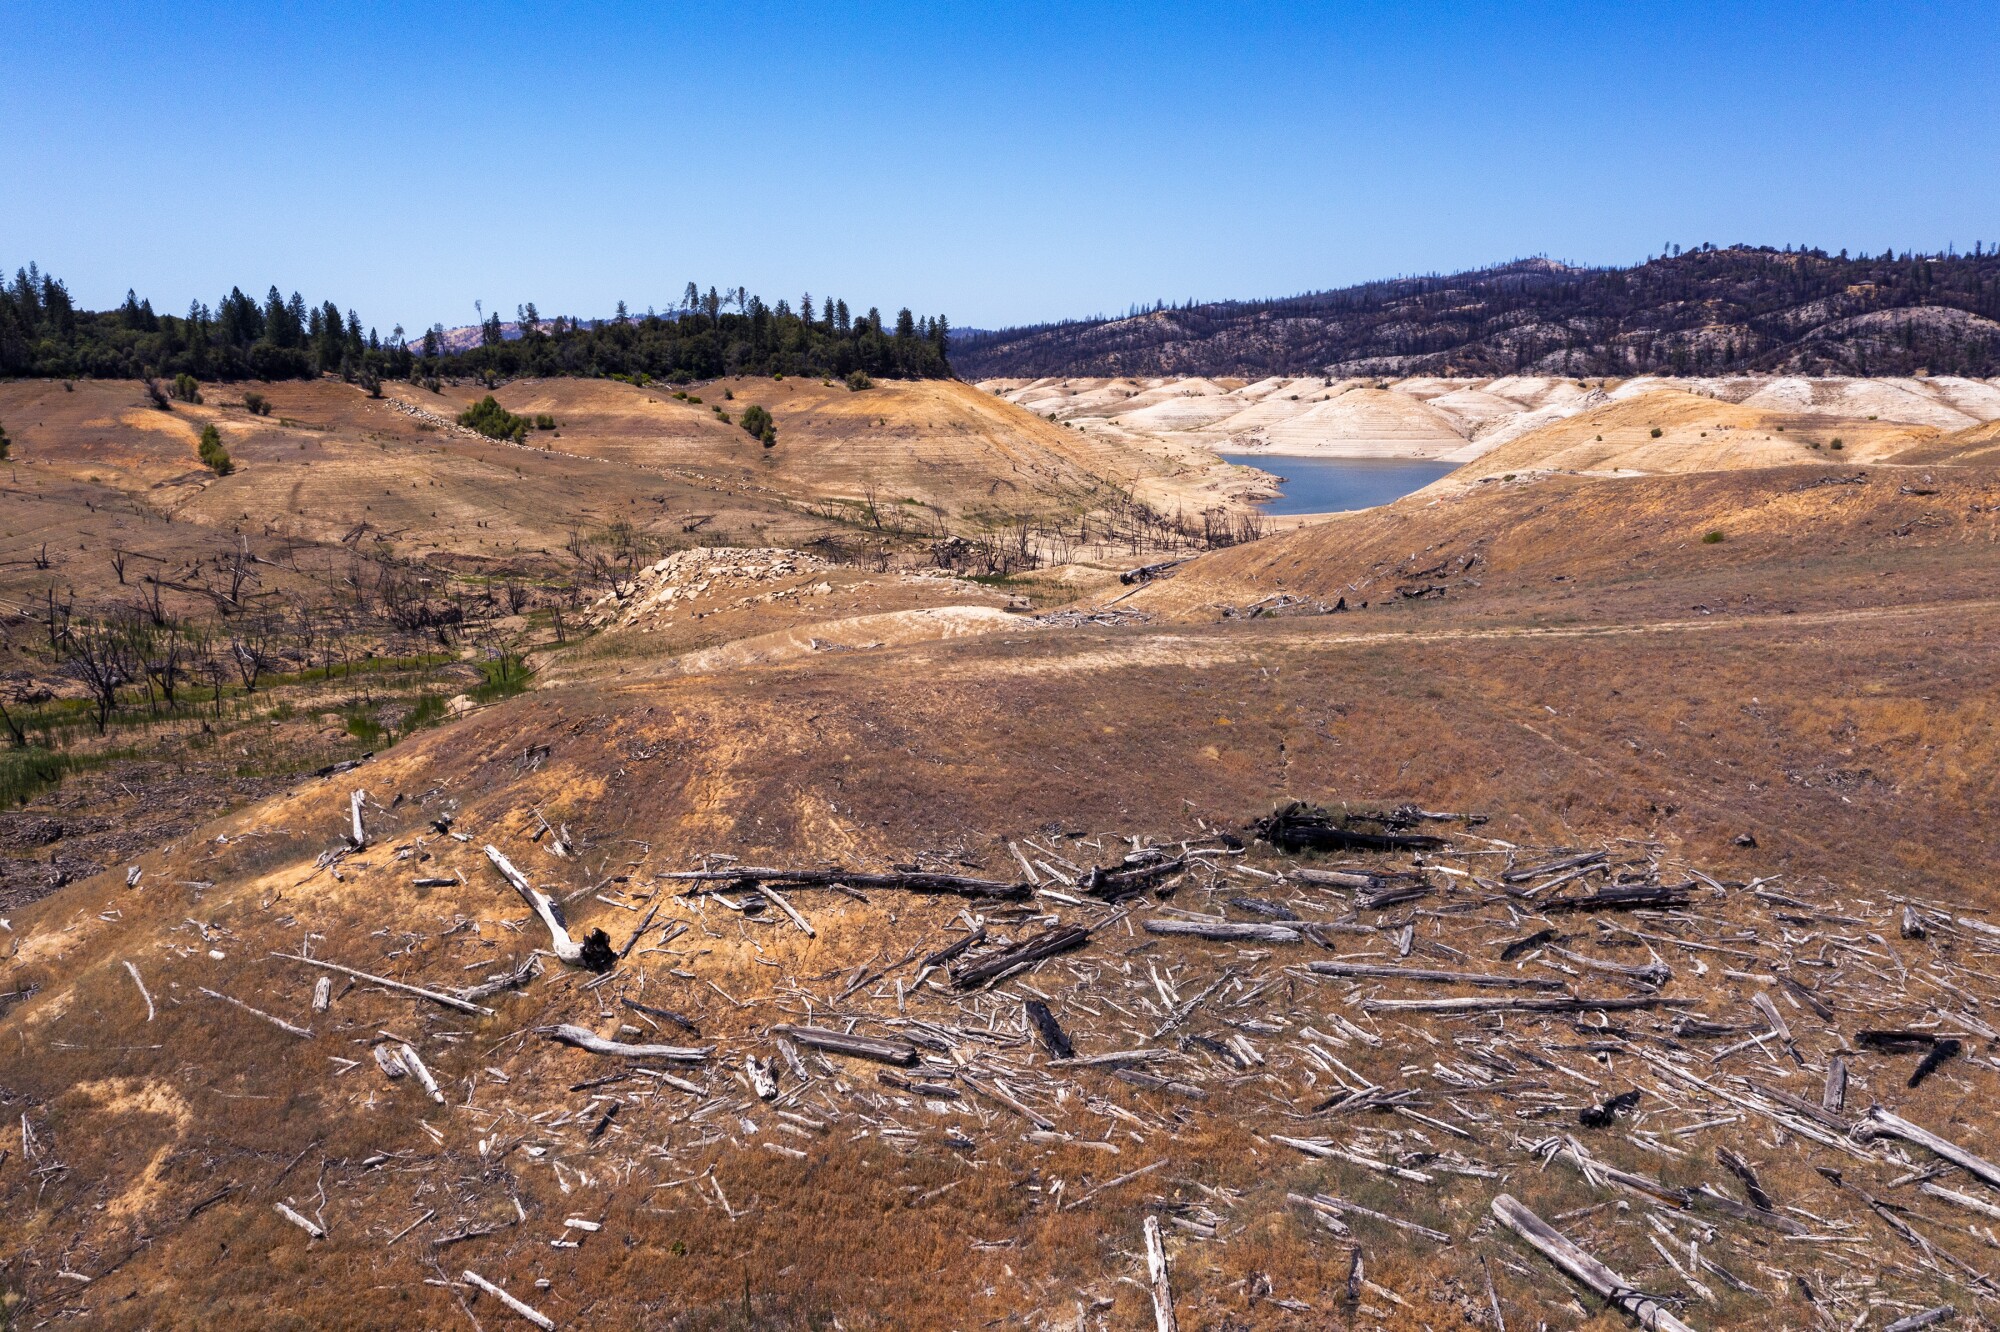 Fallen trees once underwater are exposed as the water recedes into Lake Oroville.